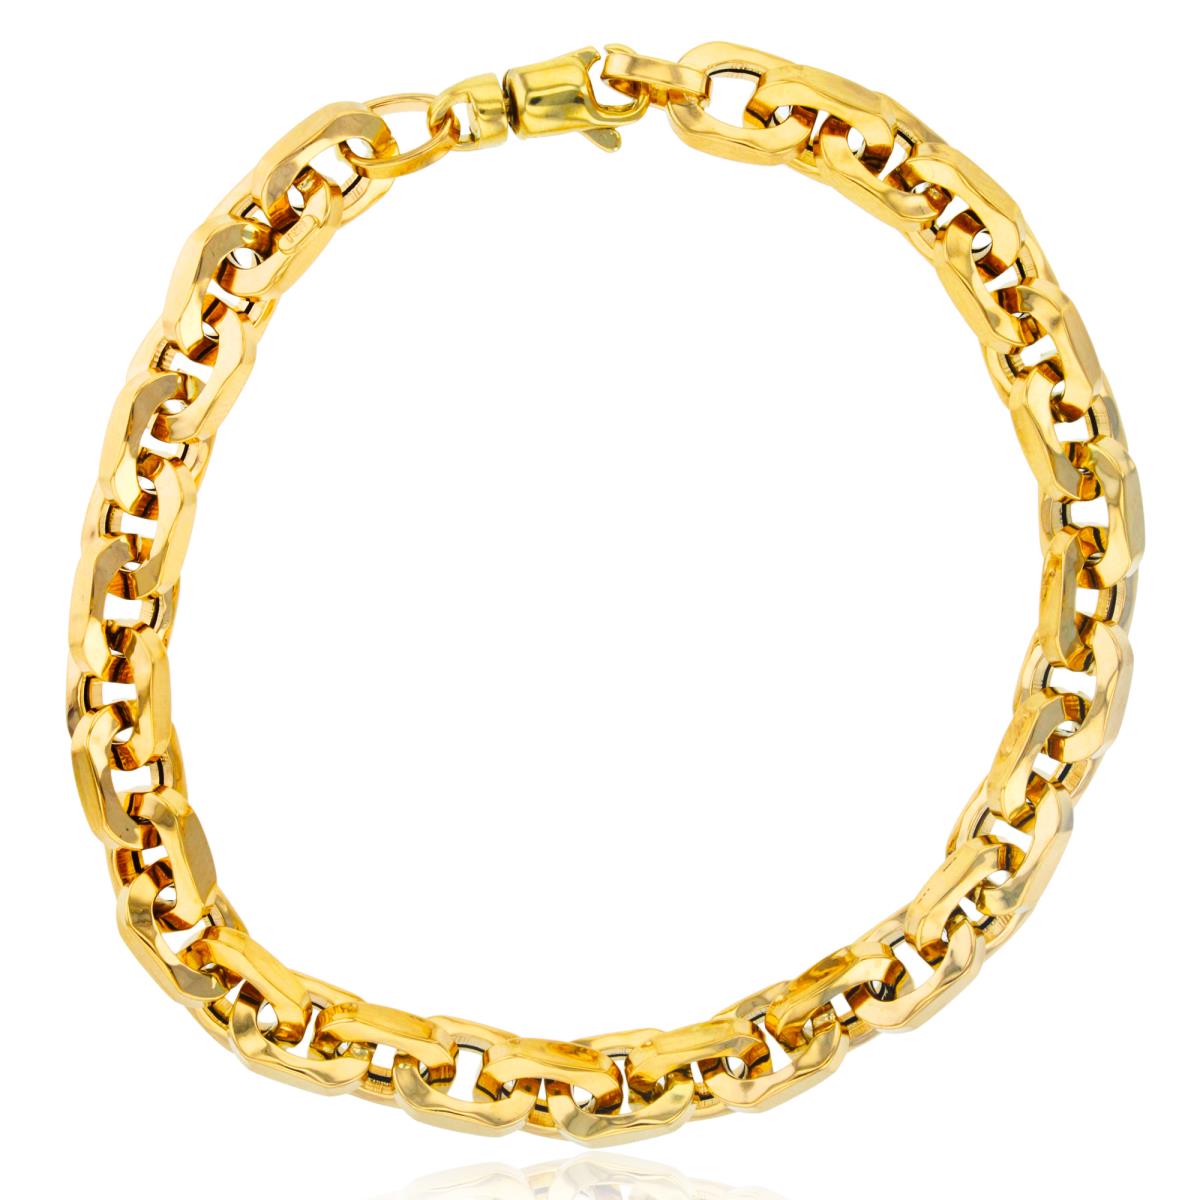 10K Yellow Gold 7mm Hammered Cable 8.25" Chain Bracelet